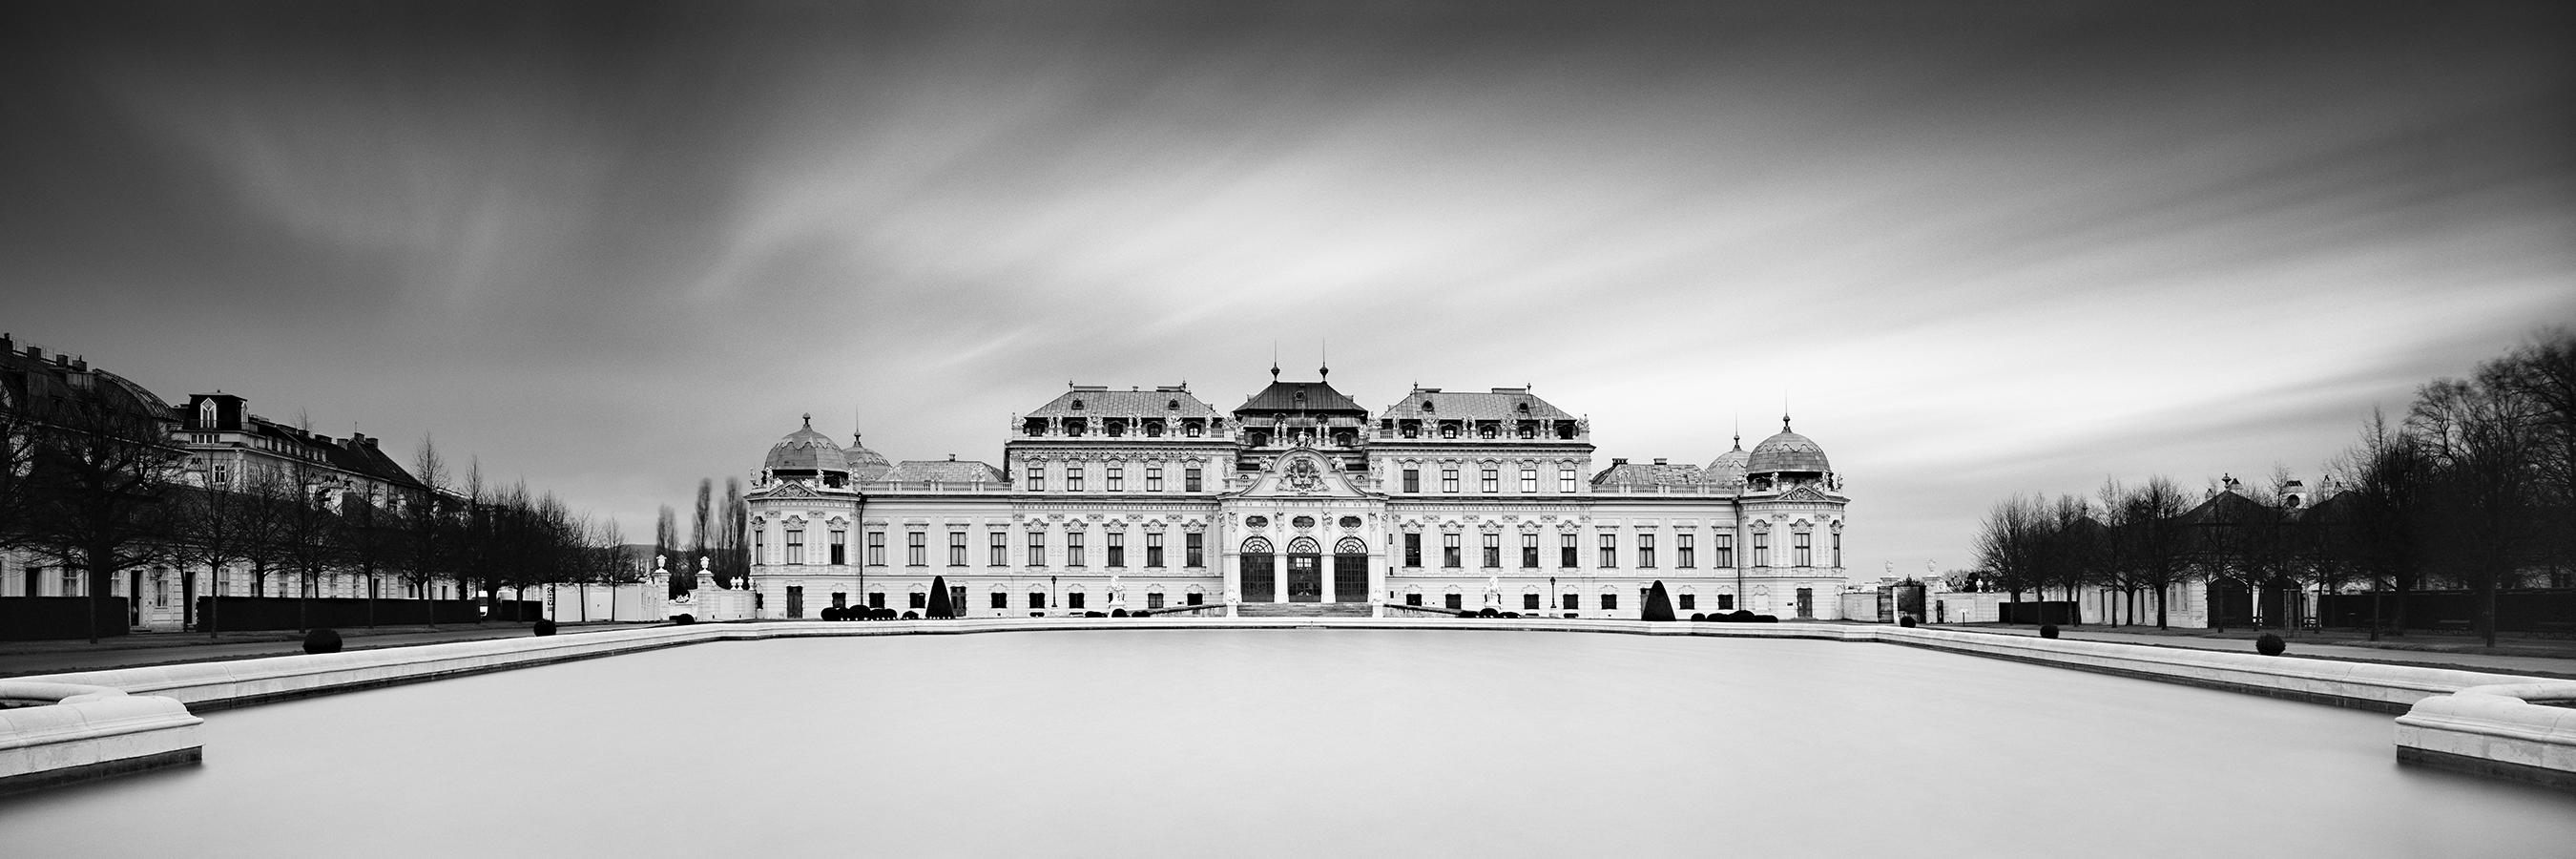 Gerald Berghammer Black and White Photograph - Upper Belvedere palace, Panorama, Vienna, black & white landscape photography